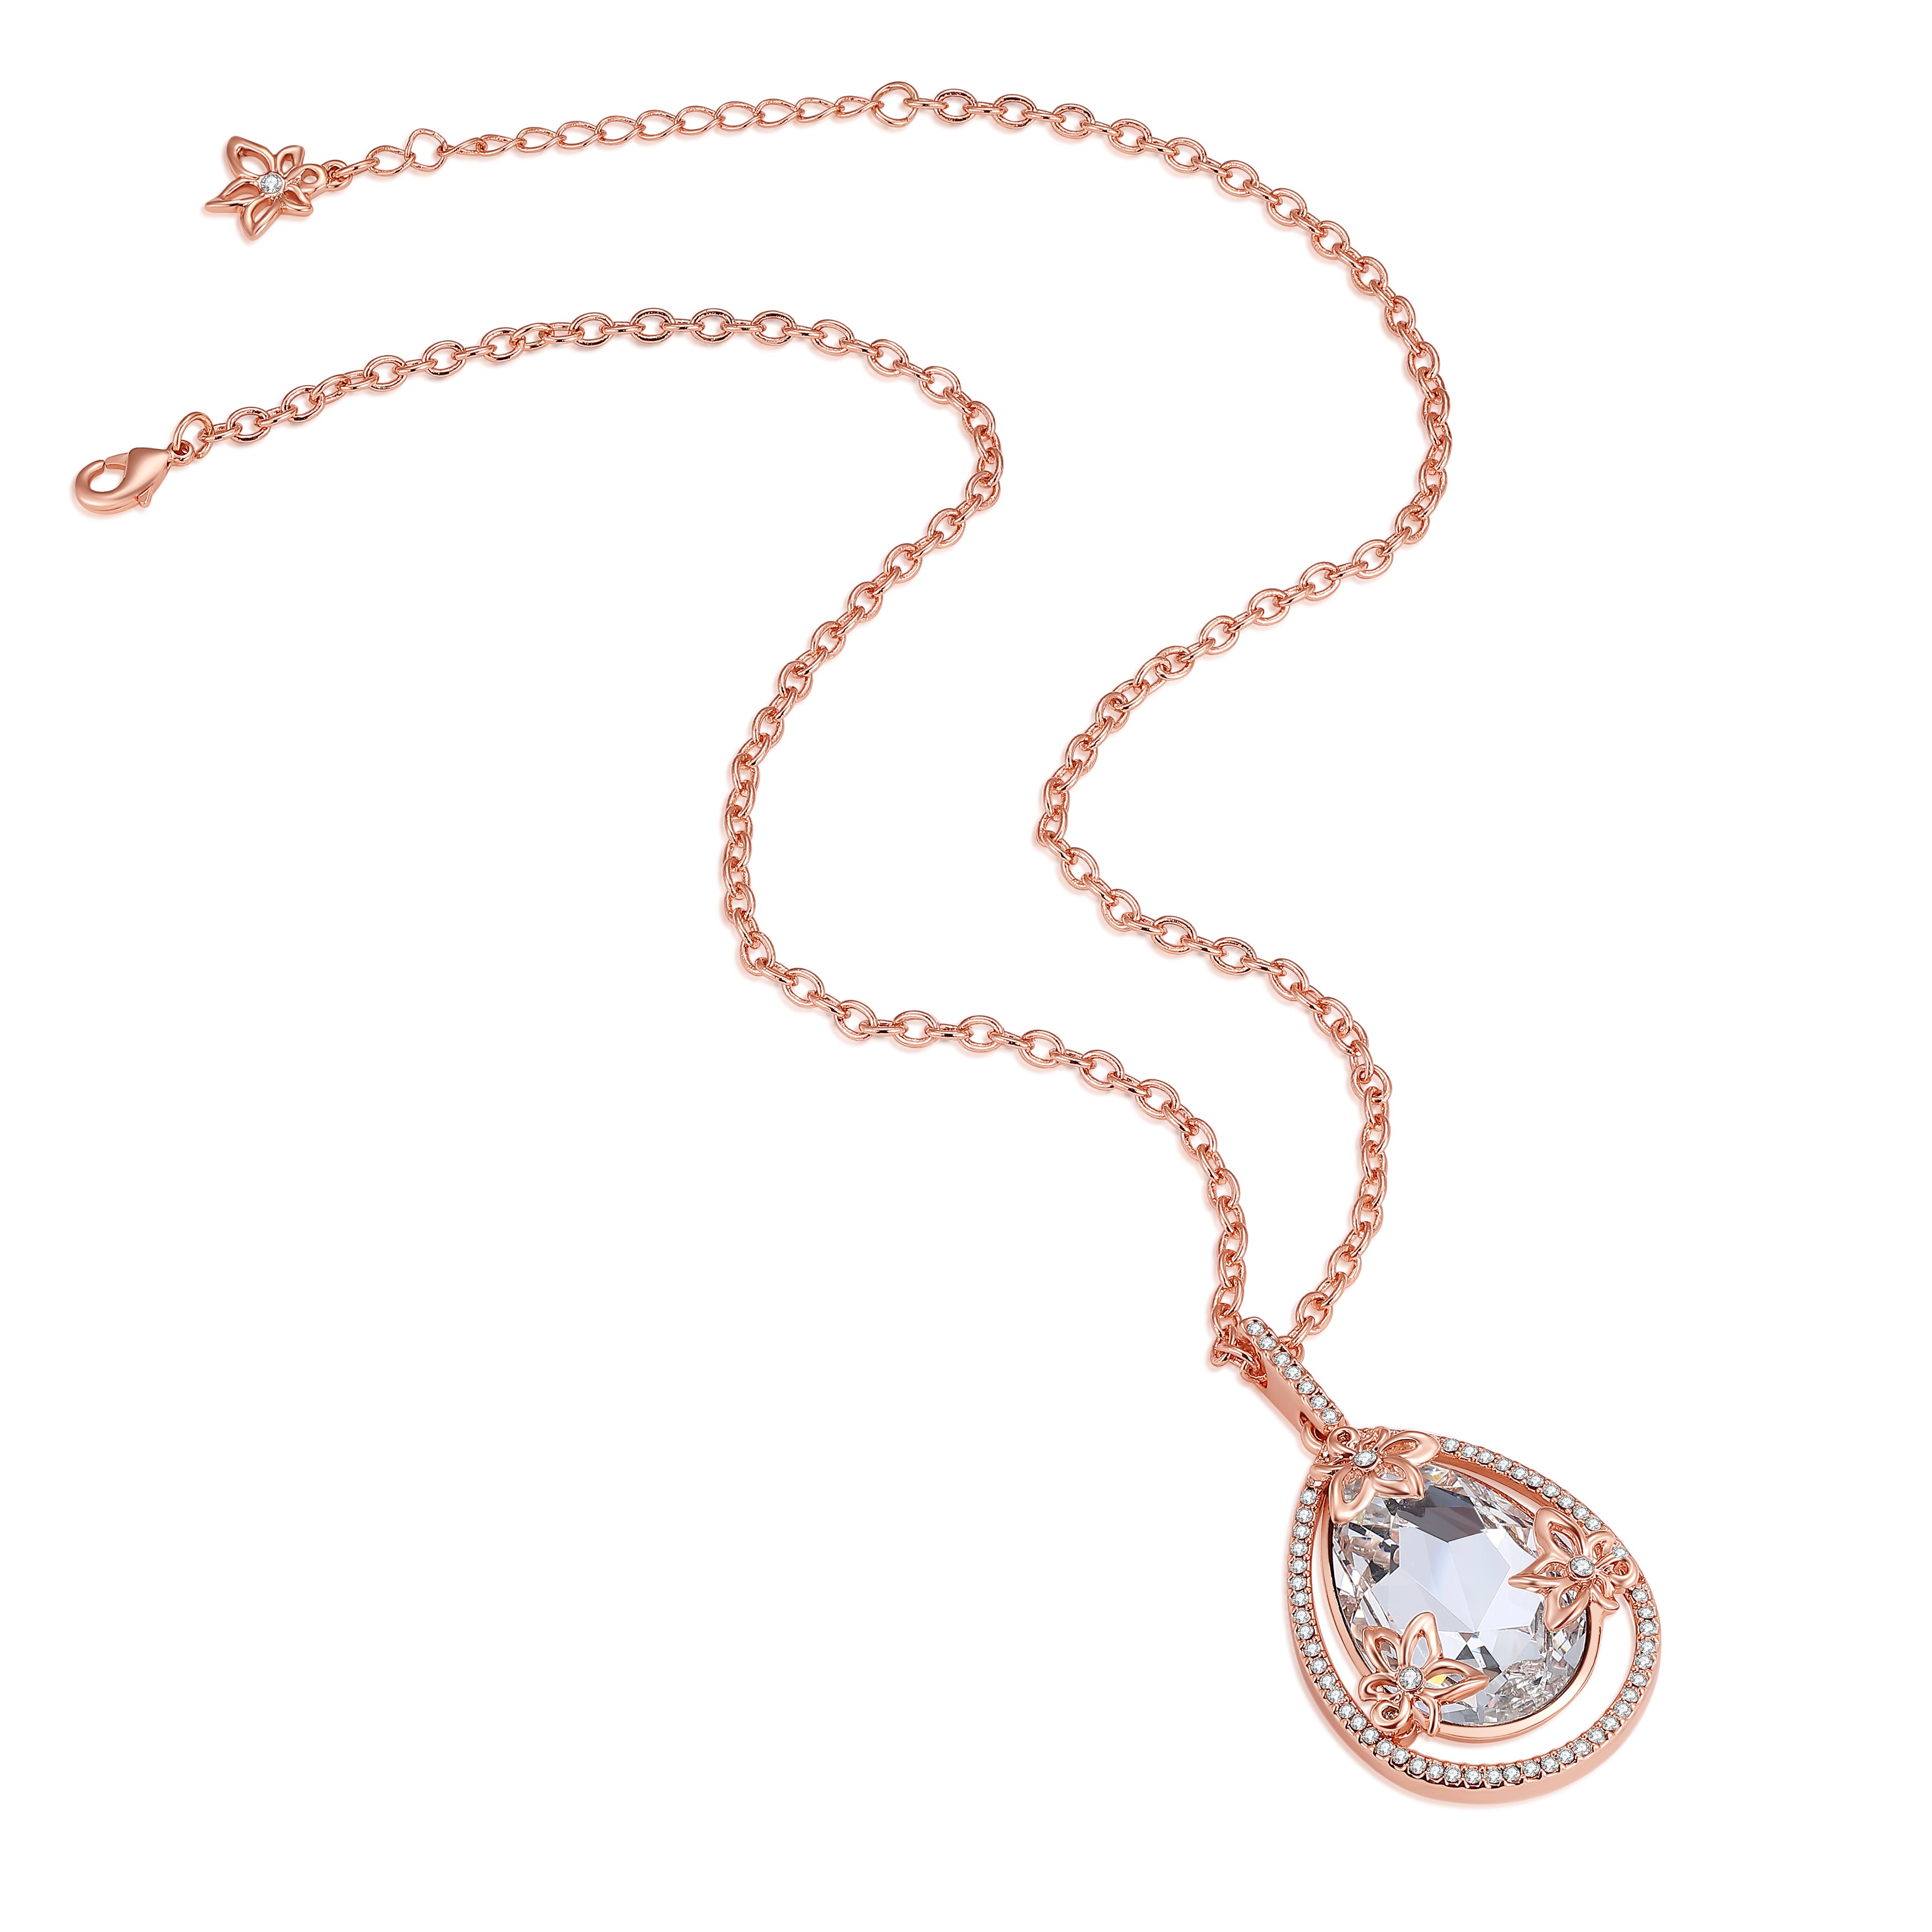 Rose gold VICACCI Mermaid tears Pendant necklace